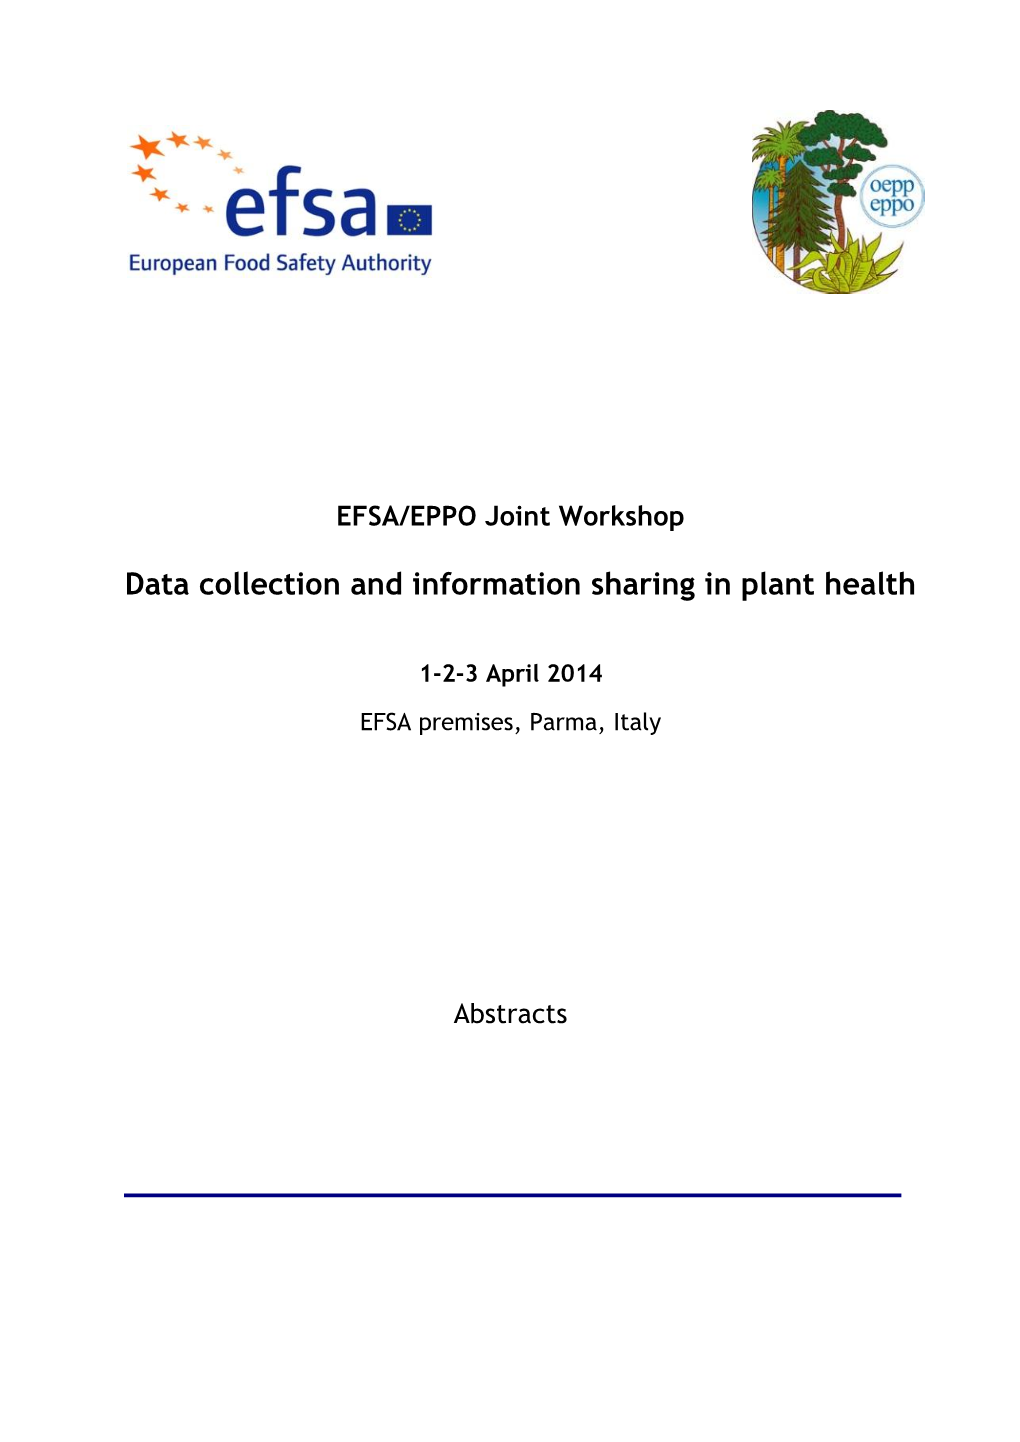 Data Collection and Information Sharing in Plant Health